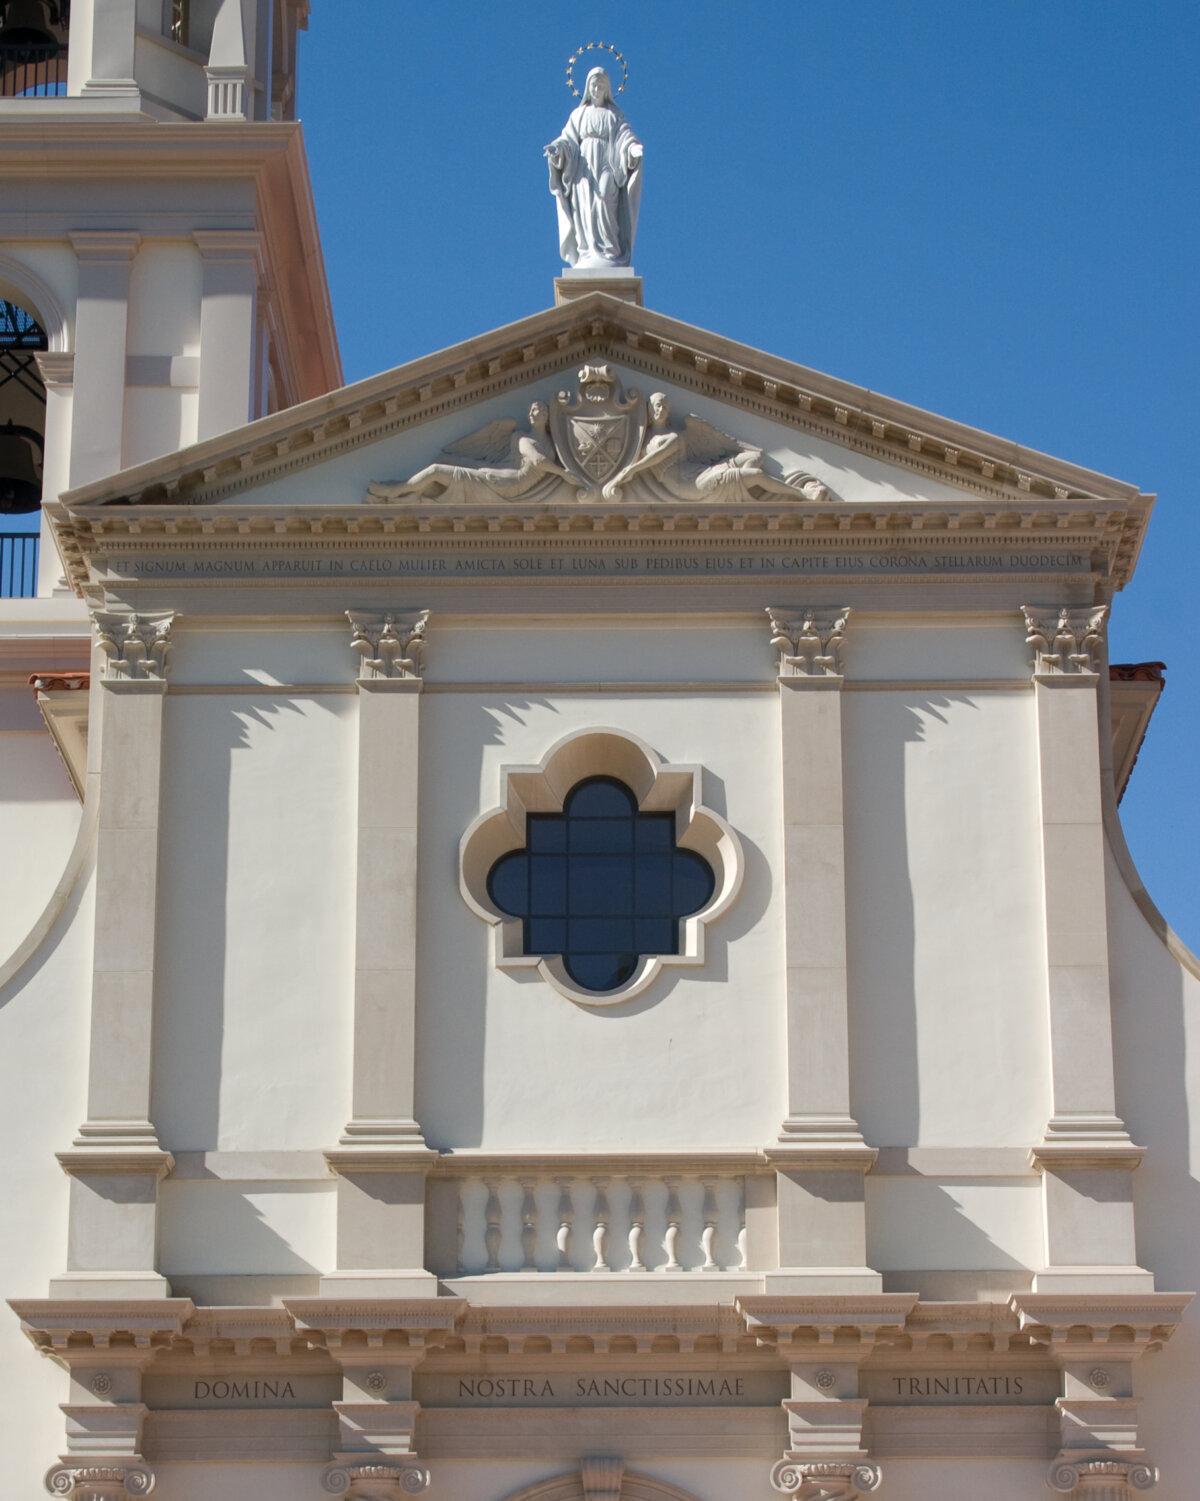 Above the main entrance, a classical temple face is adorned with four pilasters (engaged columns), a central quatrefoil (four-pointed) window, and a classical pediment topped by a sculpture of the Virgin Mary. Within the pediment is a bas-relief of the college's coat of arms flanked by two angels. (Courtesy of Thomas Aquinas College)